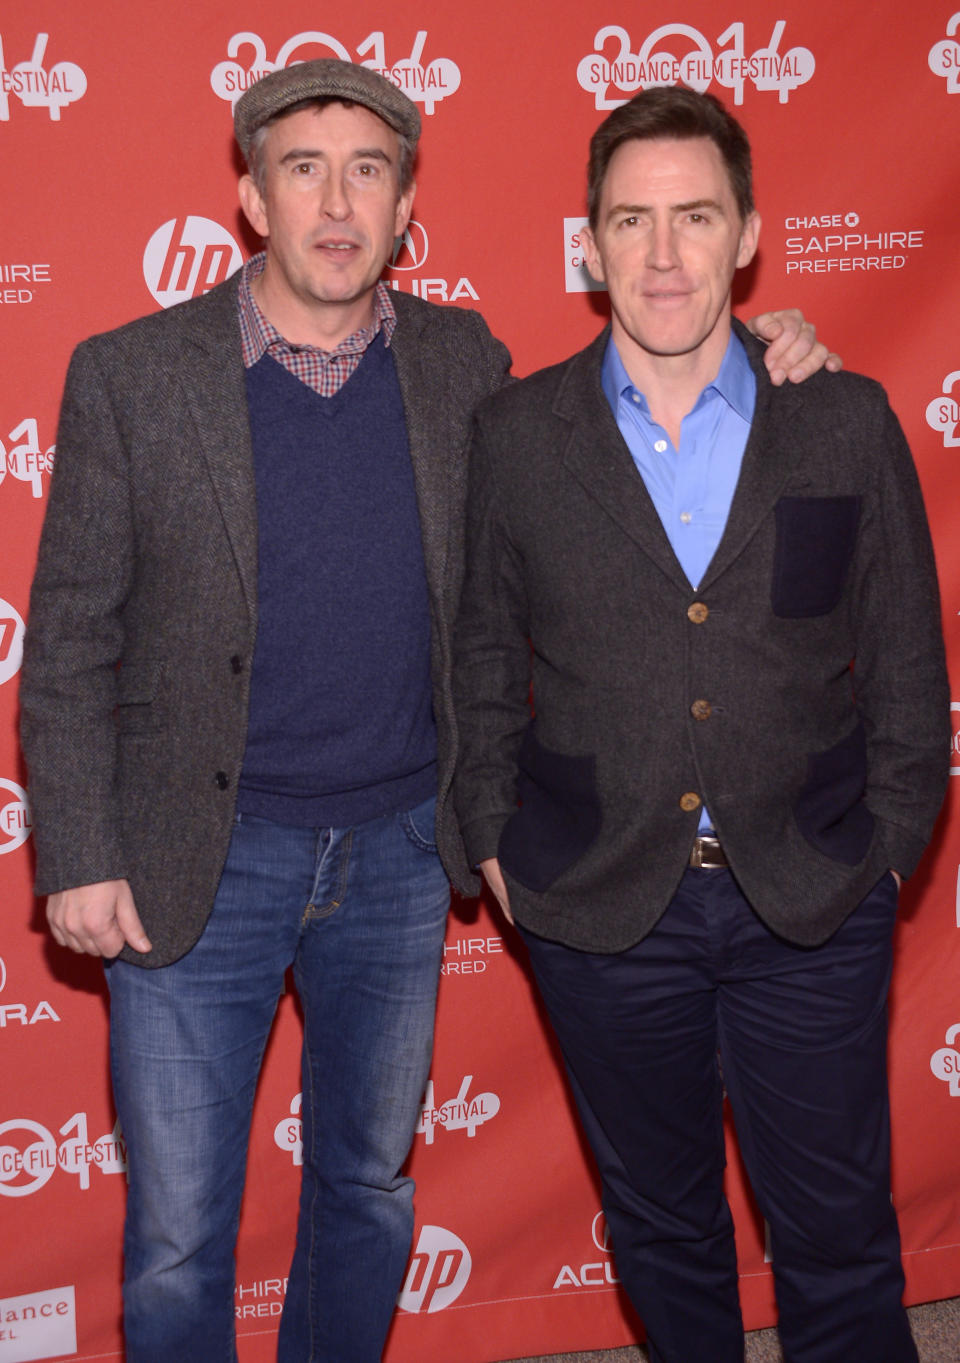 PARK CITY, UT - JANUARY 20:  Steve Coogan and Rob Brydon attend the premiere of 'The Trip To Italy' at the Eccles Center Theatre during the 2014 Sundance Film Festival on January 20, 2014 in Park City, Utah.  (Photo by Michael Loccisano/Getty Images for Sundance Film Festival)